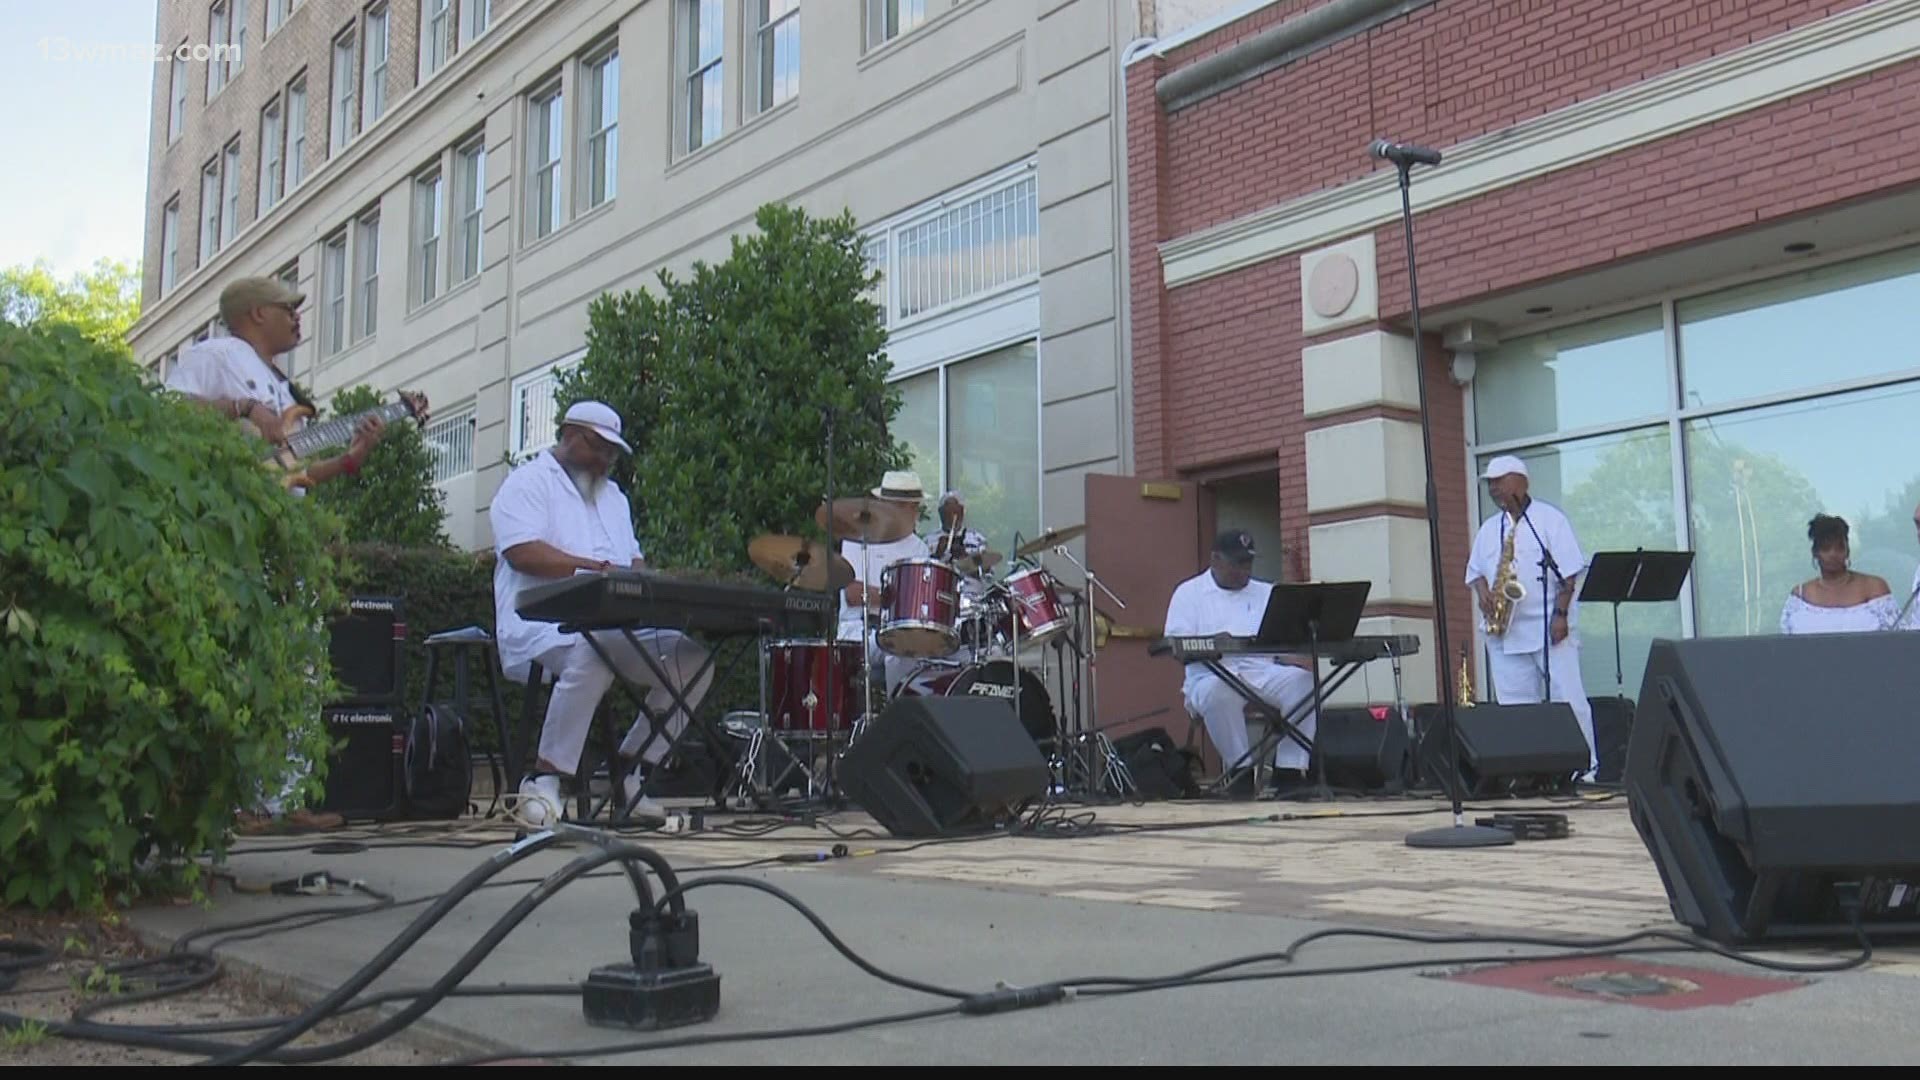 Macon’s Douglass Theatre will play home to the sweet sounds of jazz music this weekend. On Sunday, the venue will present Jazz in the Courtyard.